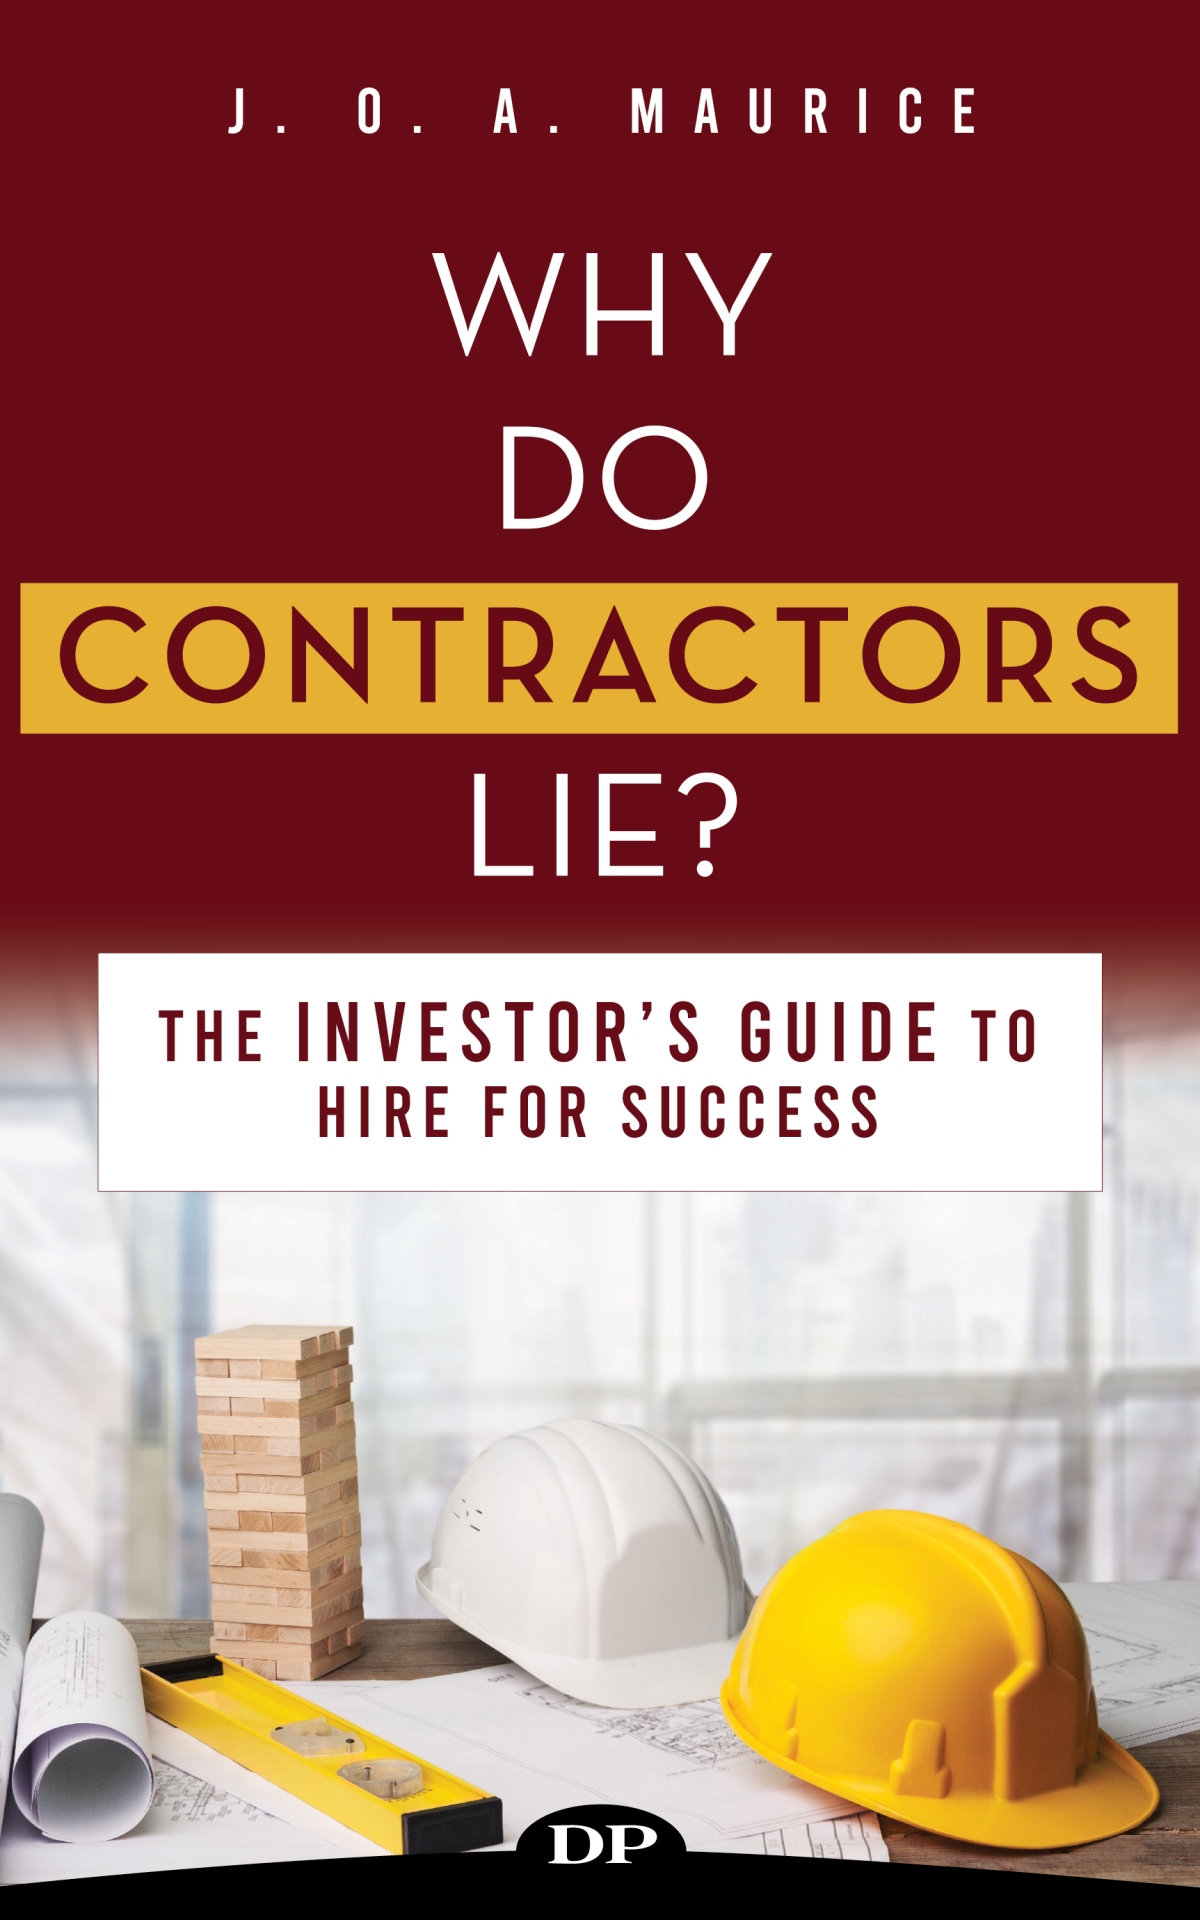 Why Do Contractors Lie? by J.O.A. Maurice